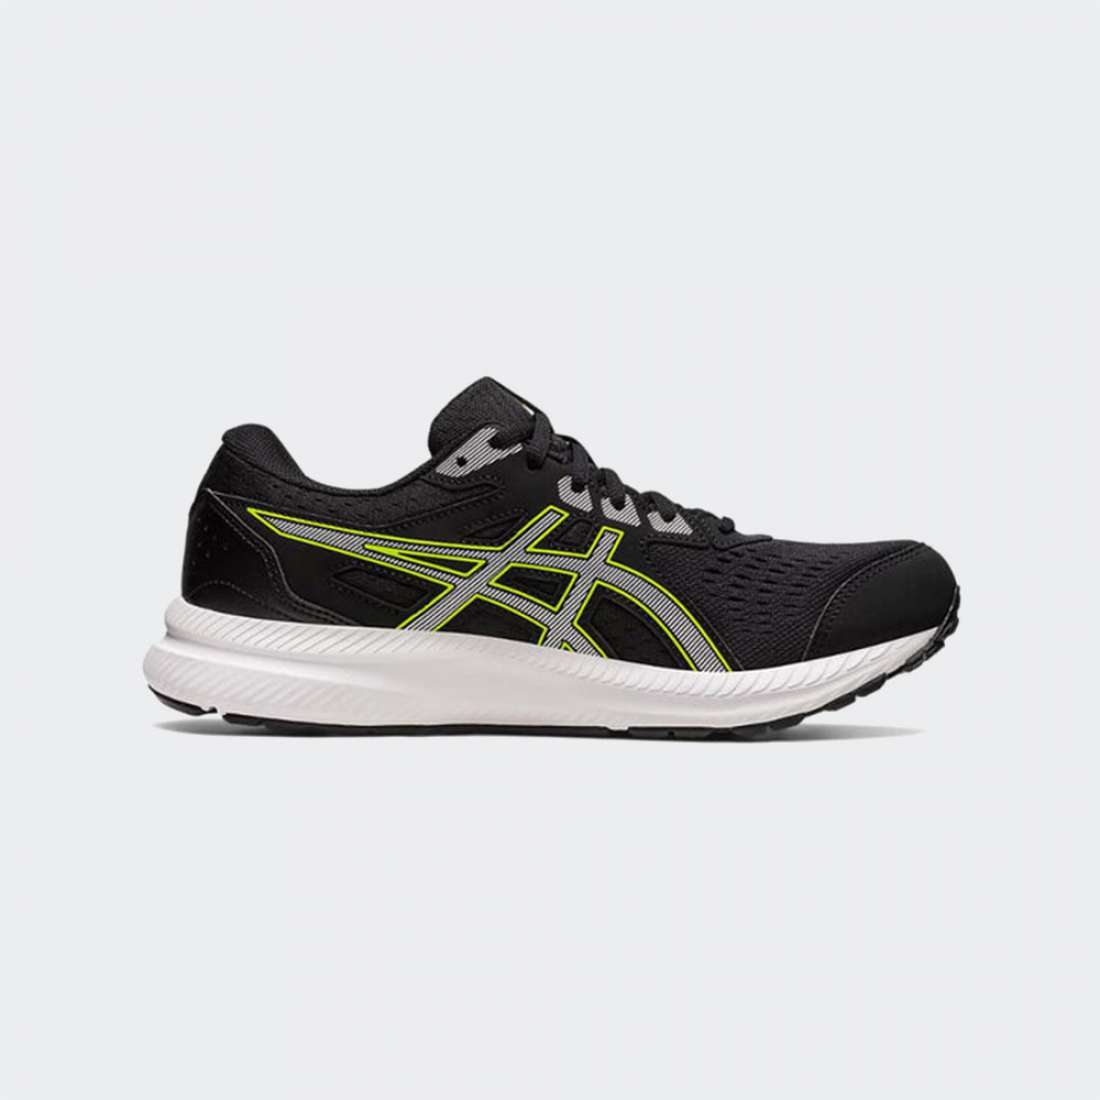 ASICS GEL CONTED 8 BLACK/PURE SILVER